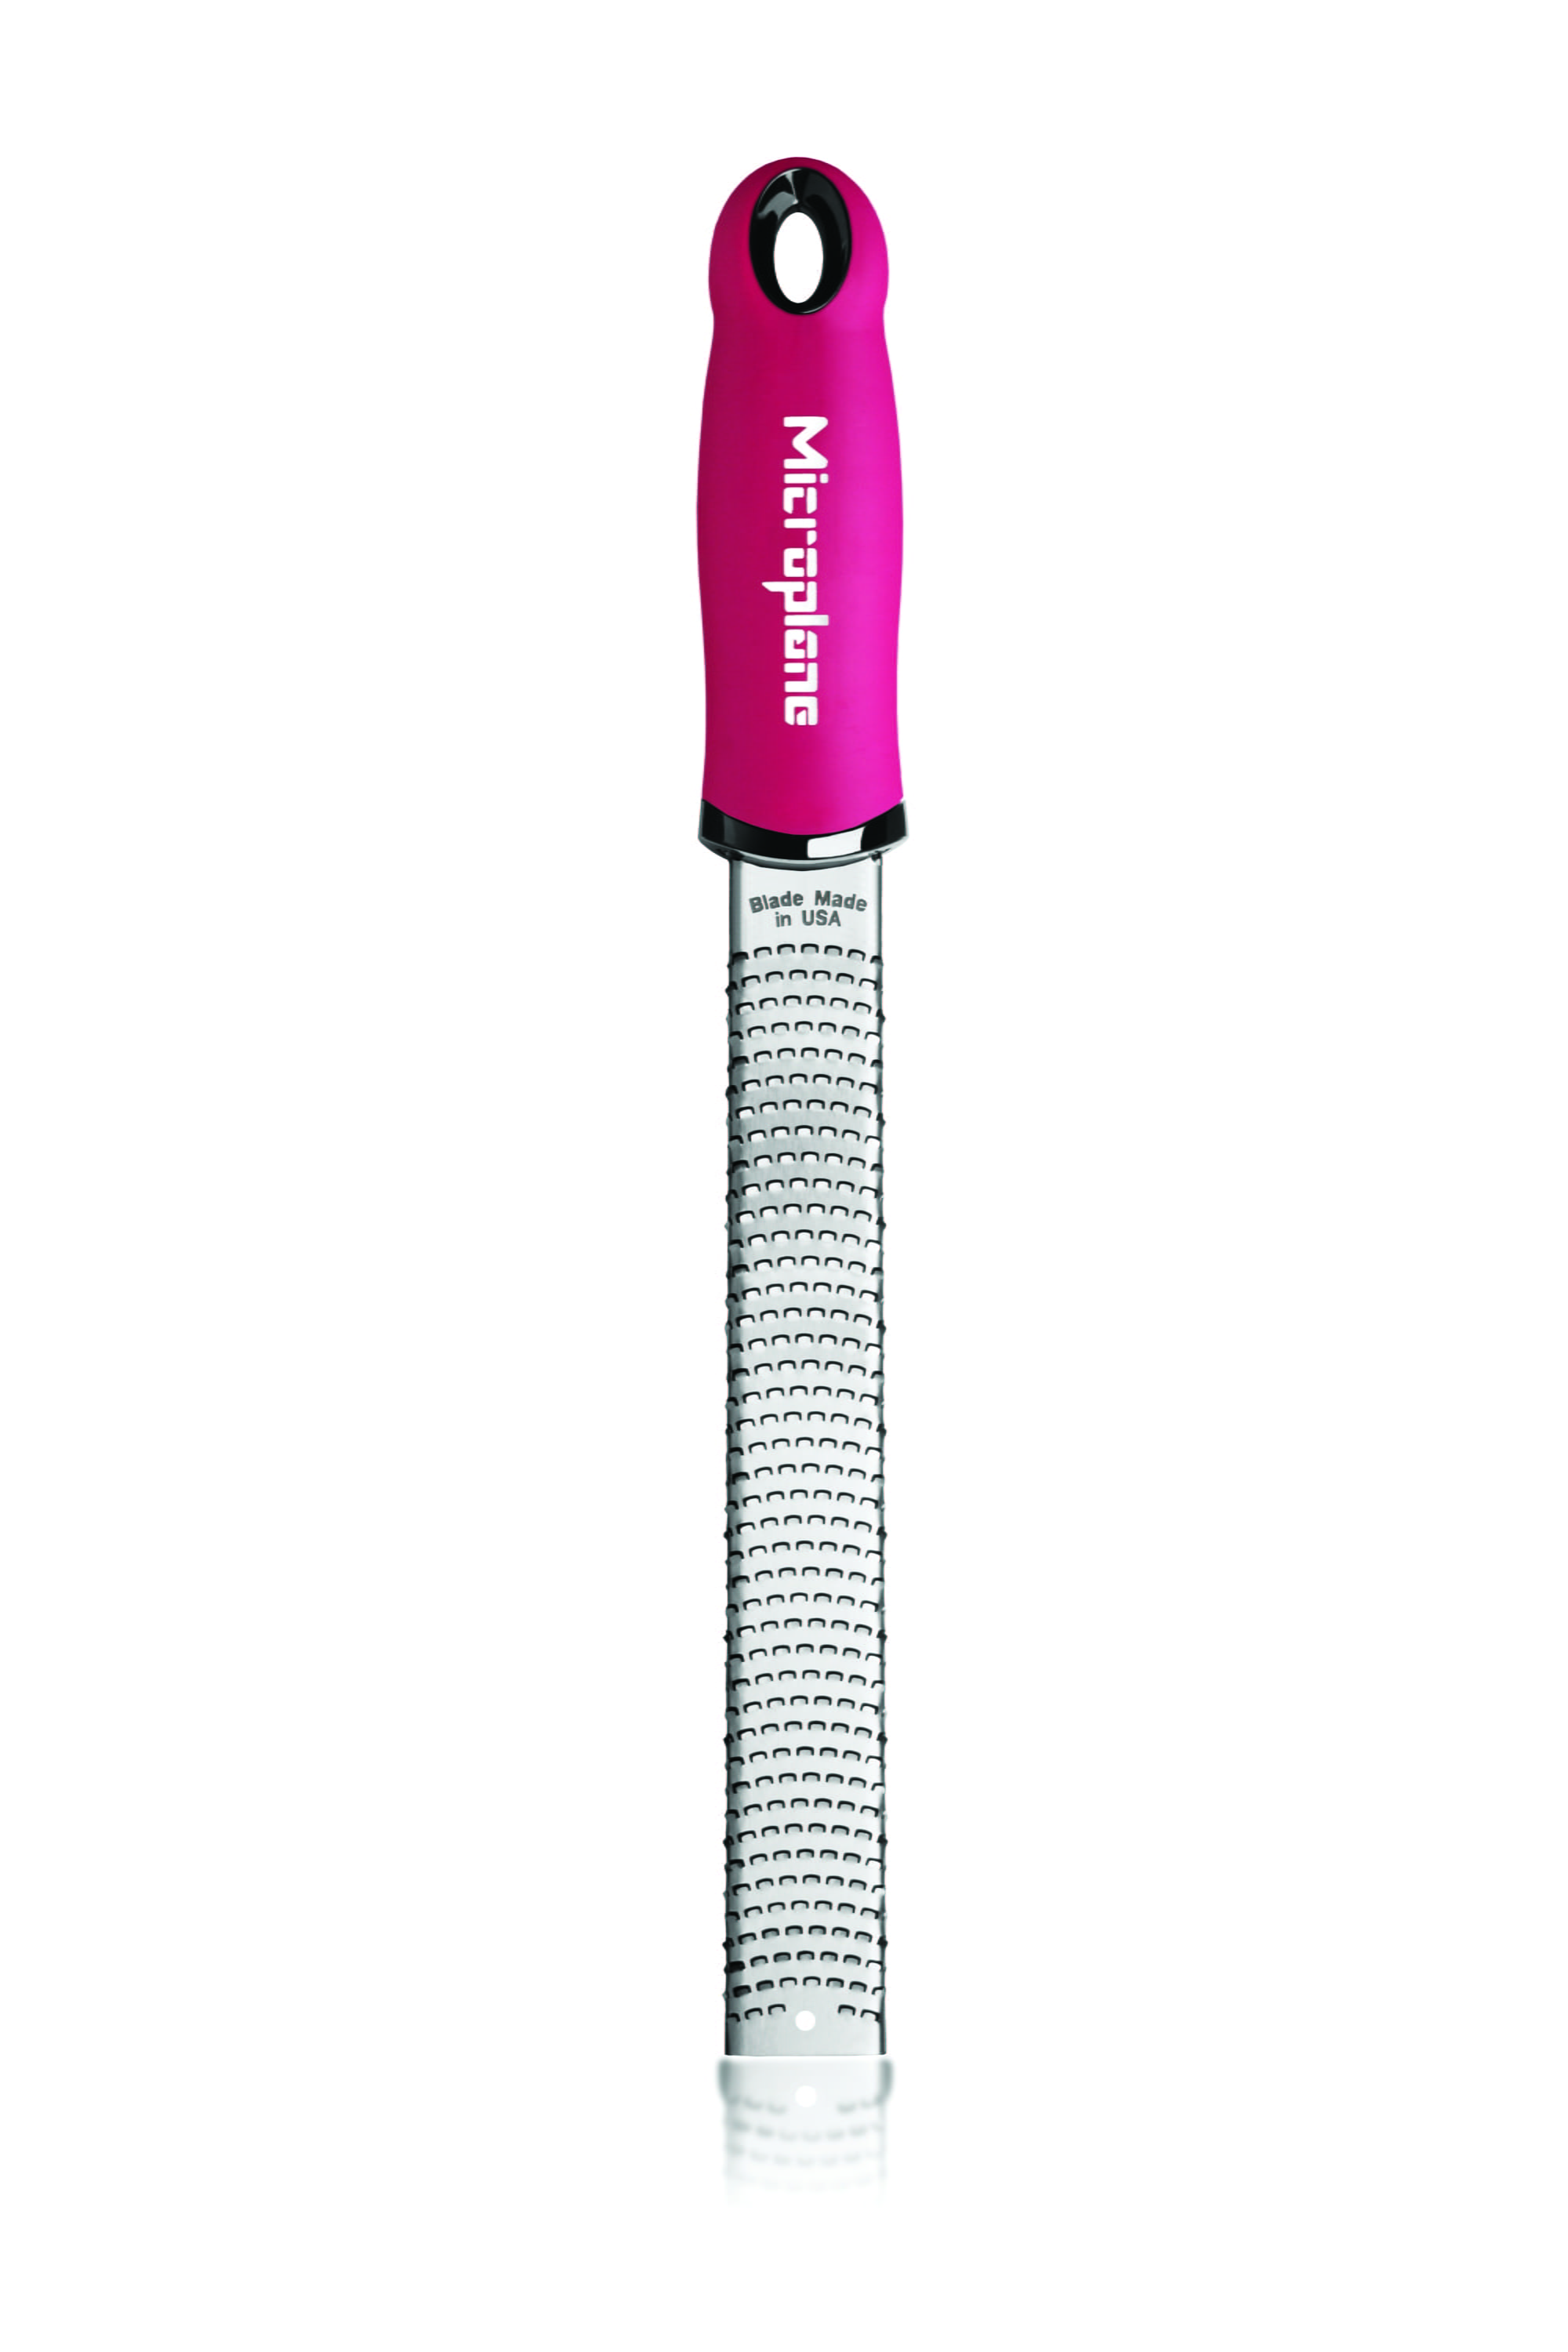 Premium Zester-Reibe Classic - pink, Microplane